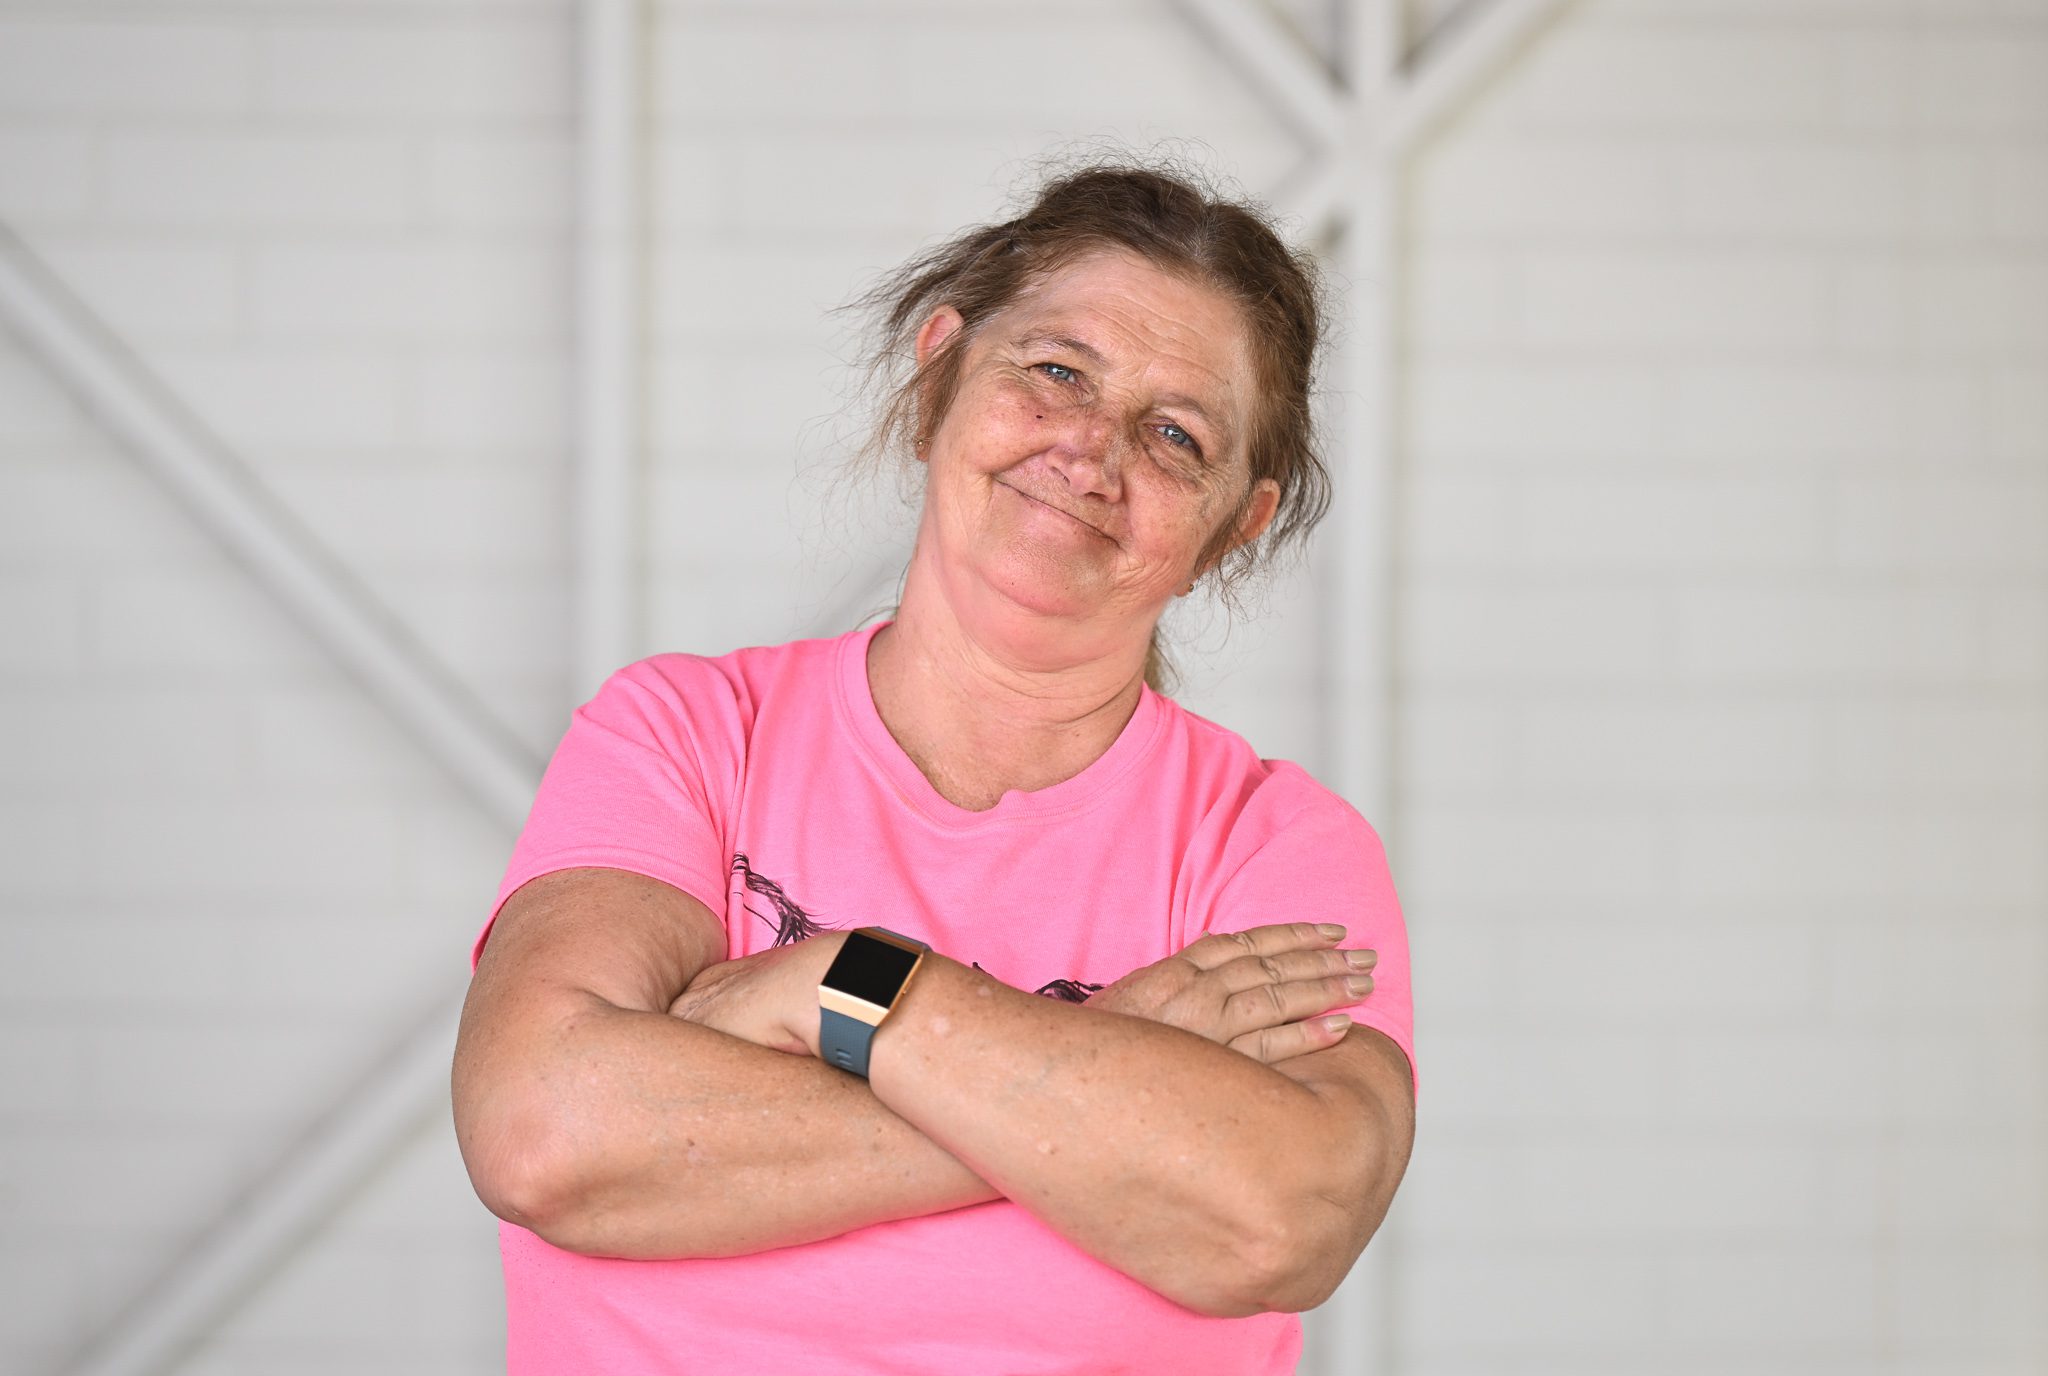 A lady wearing a pink tshirt, with her arms crossed looking at the camera smiling.